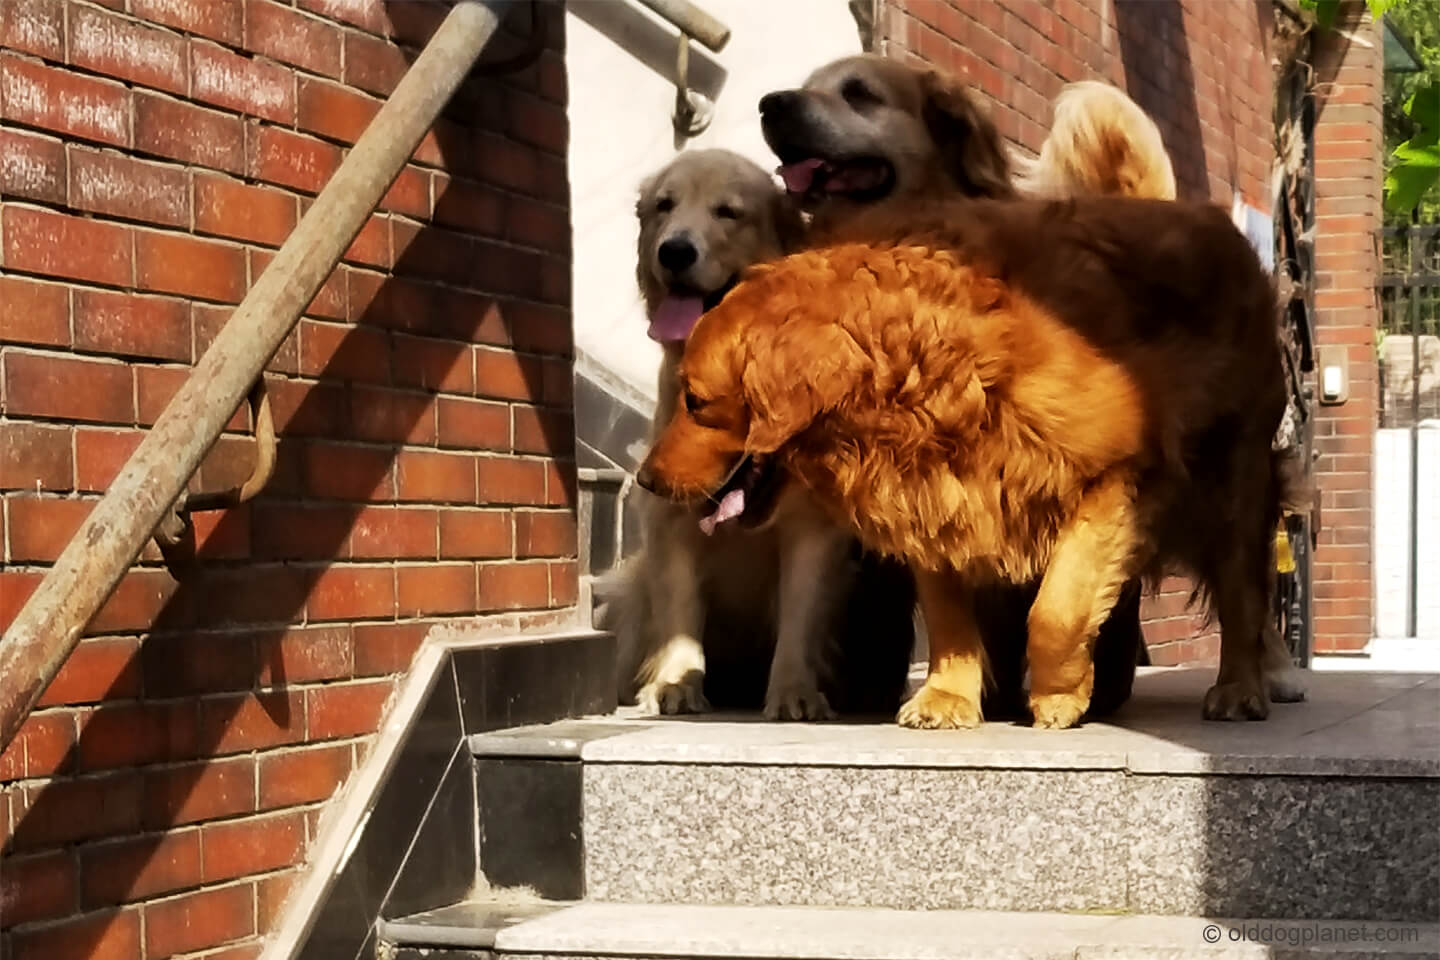 How to get an old dog up stairs